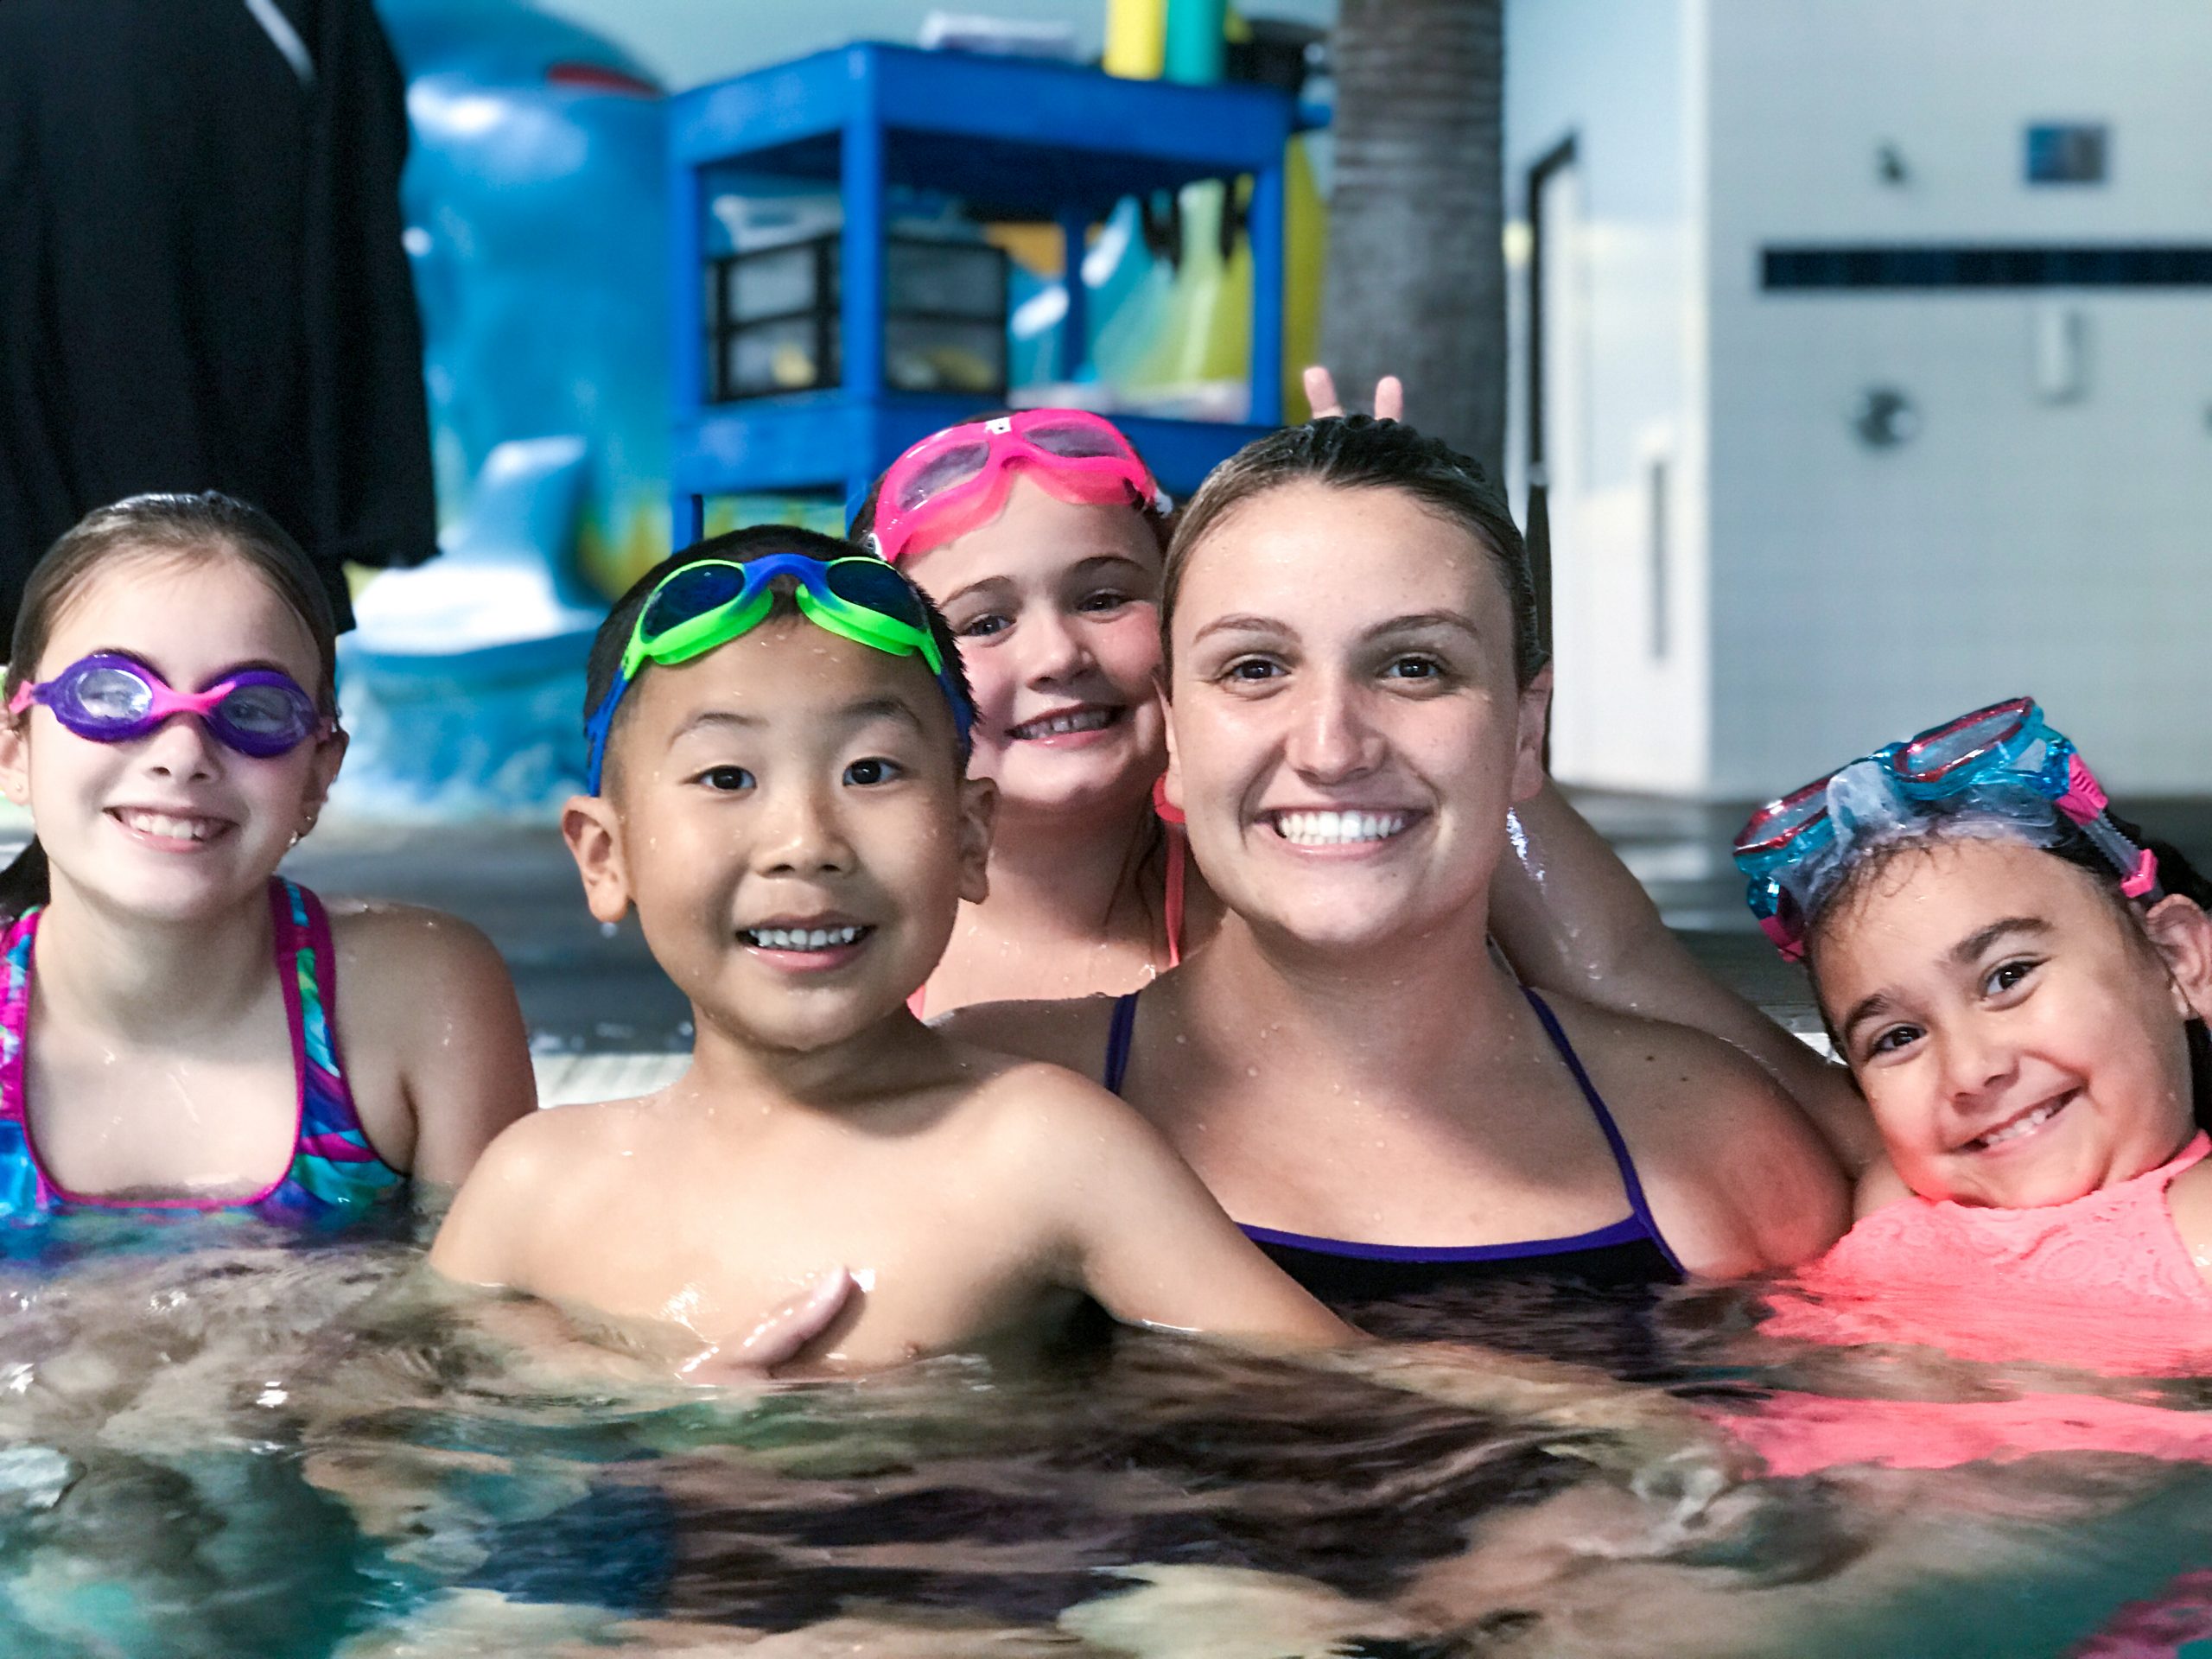 Students and Coach smiling during their fun swim class